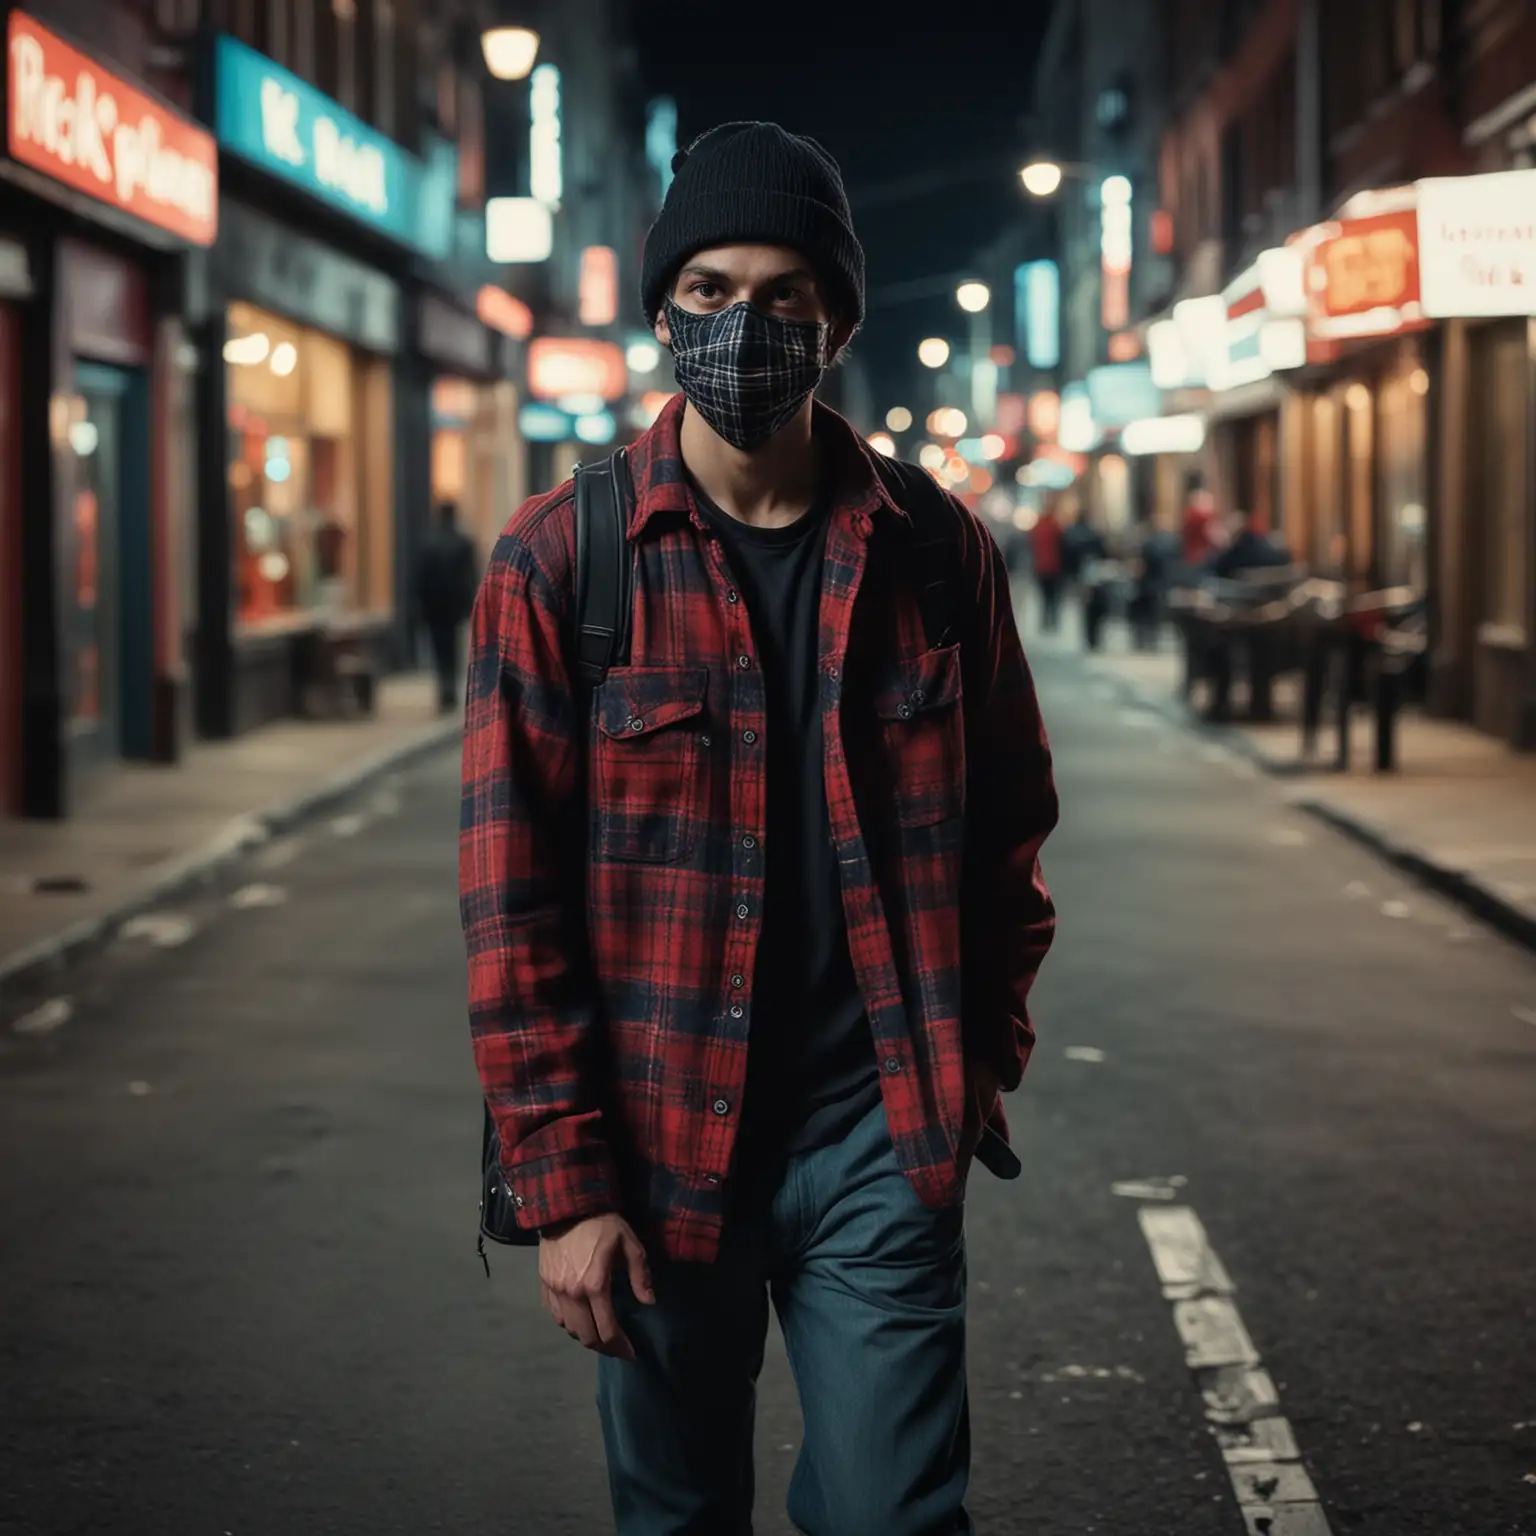 Photorealistic, street photography, inspired by the work of Vivian Maier and Henri Cartier-Bresson], [Shallow depth of field, blurred background, cool blue and red tones, grain, film texture, nighttime city setting. A full body potrait young man with black plaid shirt and cargo khaki pants, black sneakers, wearing black beanie, black mask, walks through a neon-lit urban city street at night, he looking around, holding a DSLR camera in his hand, his expression a mix of determination and nonchalance, candid view.